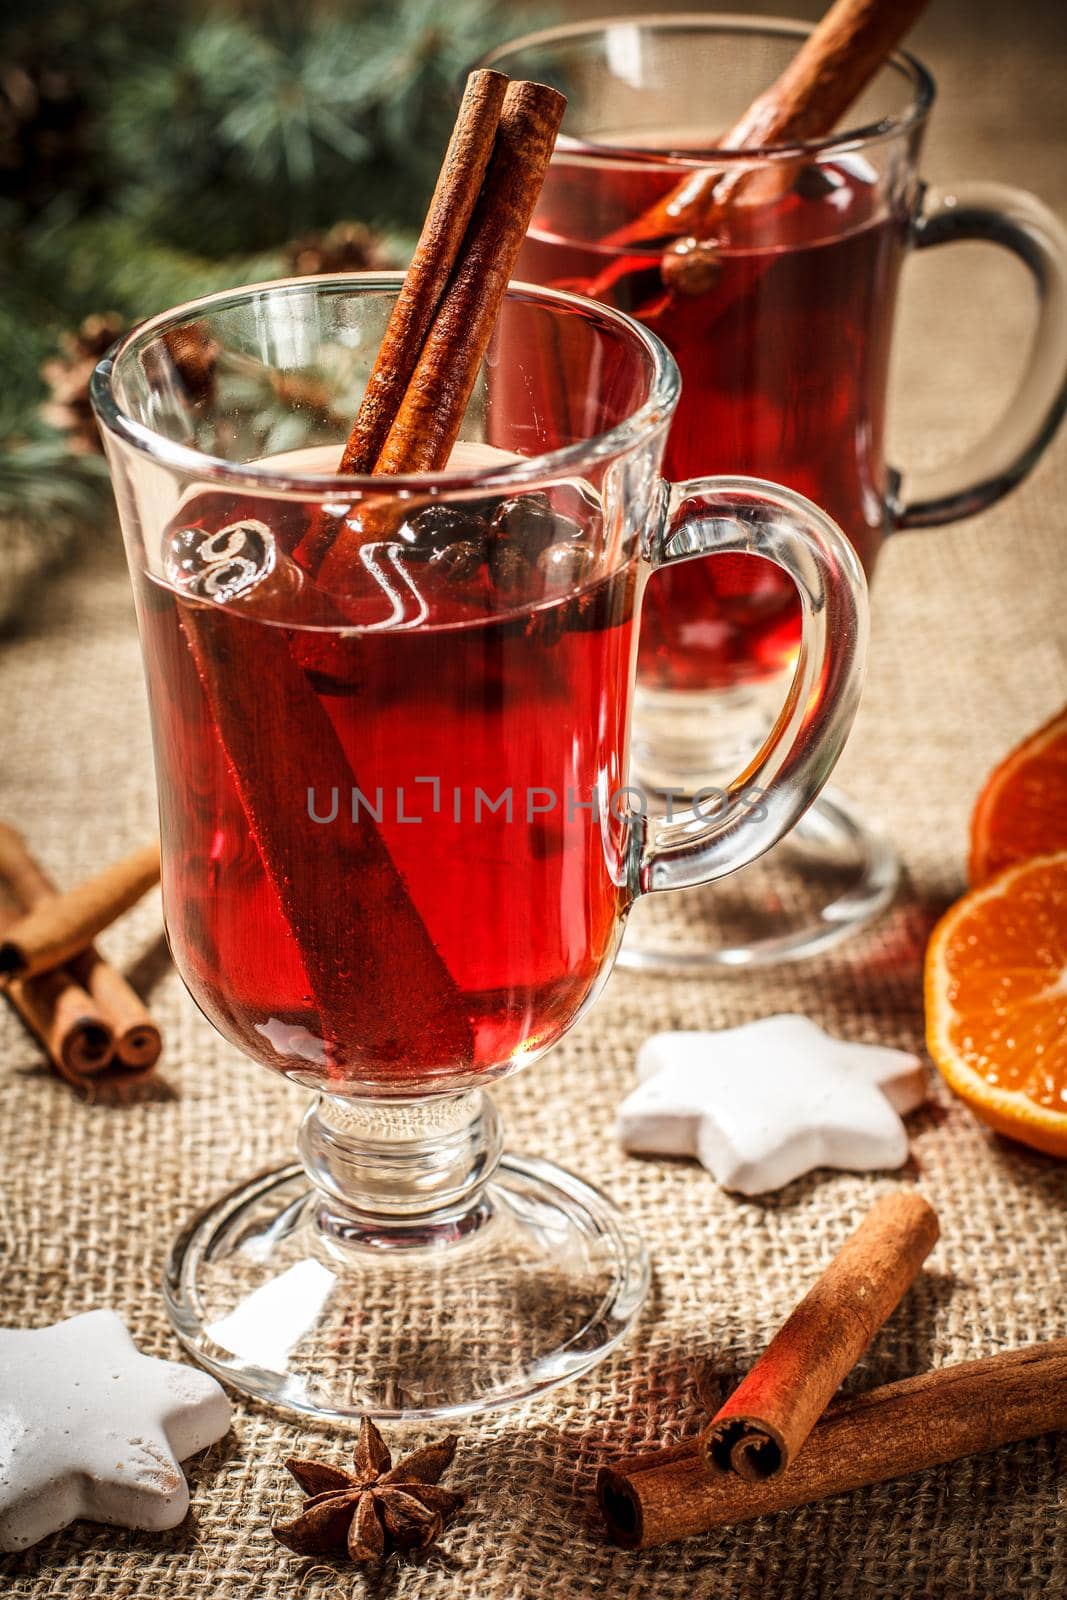 Glass of Christmas mulled wine with cinnamon, star anise and cloves on sackcloth with white biscuits, slices of orange, natural fir tree branches and cones. Color toning effect.